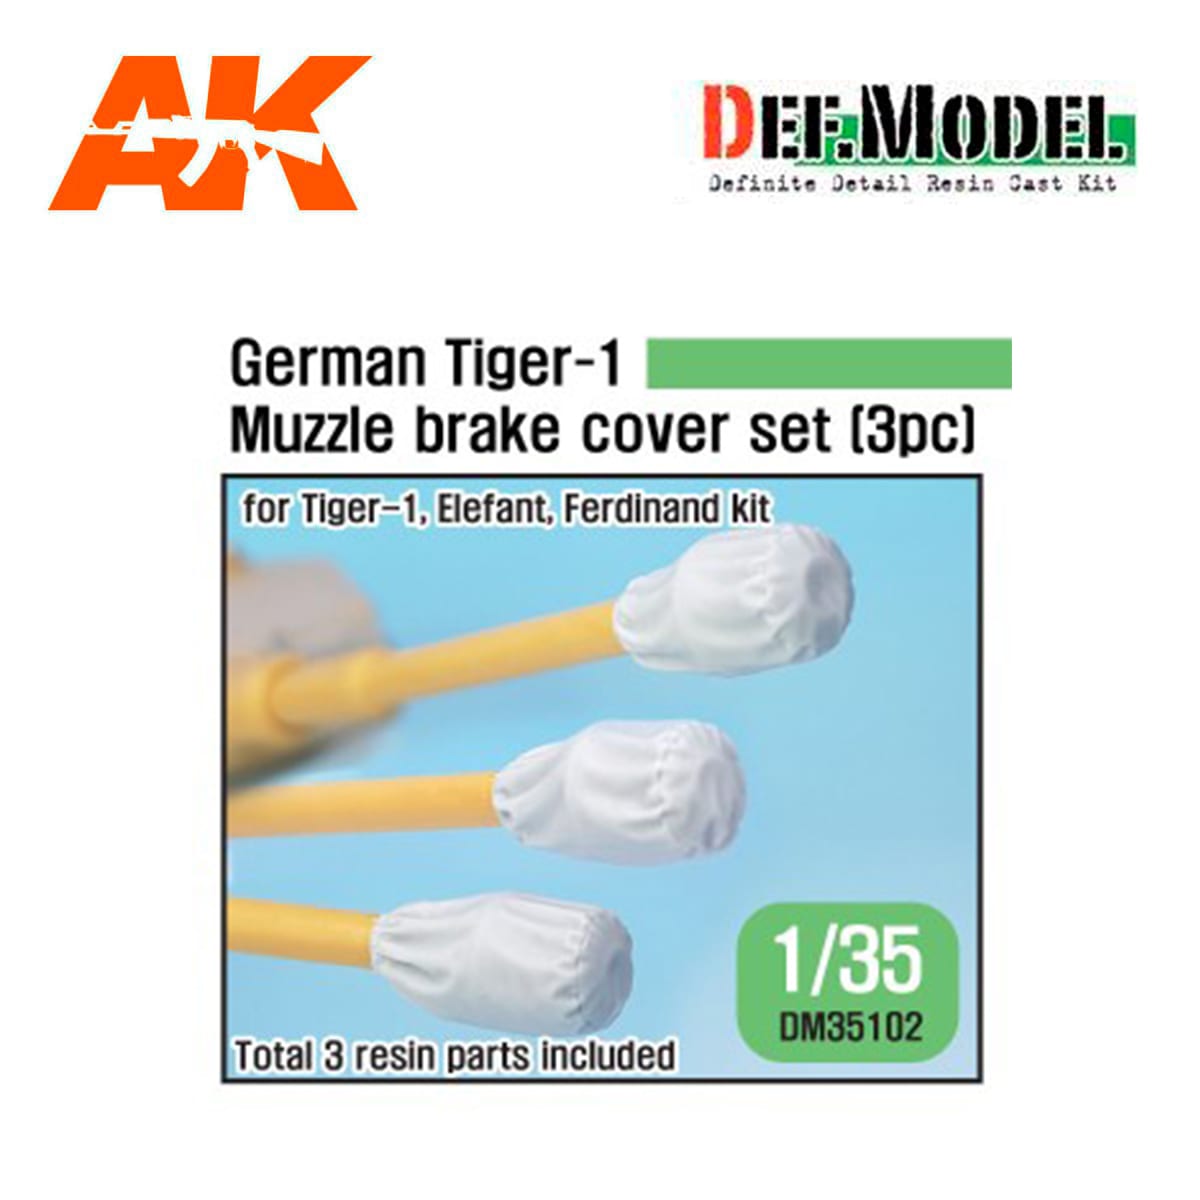 WWII German Tiger-1 Muzzle brake canvas cover set (3pc) ( for 1/35 Tiger-1 kit)